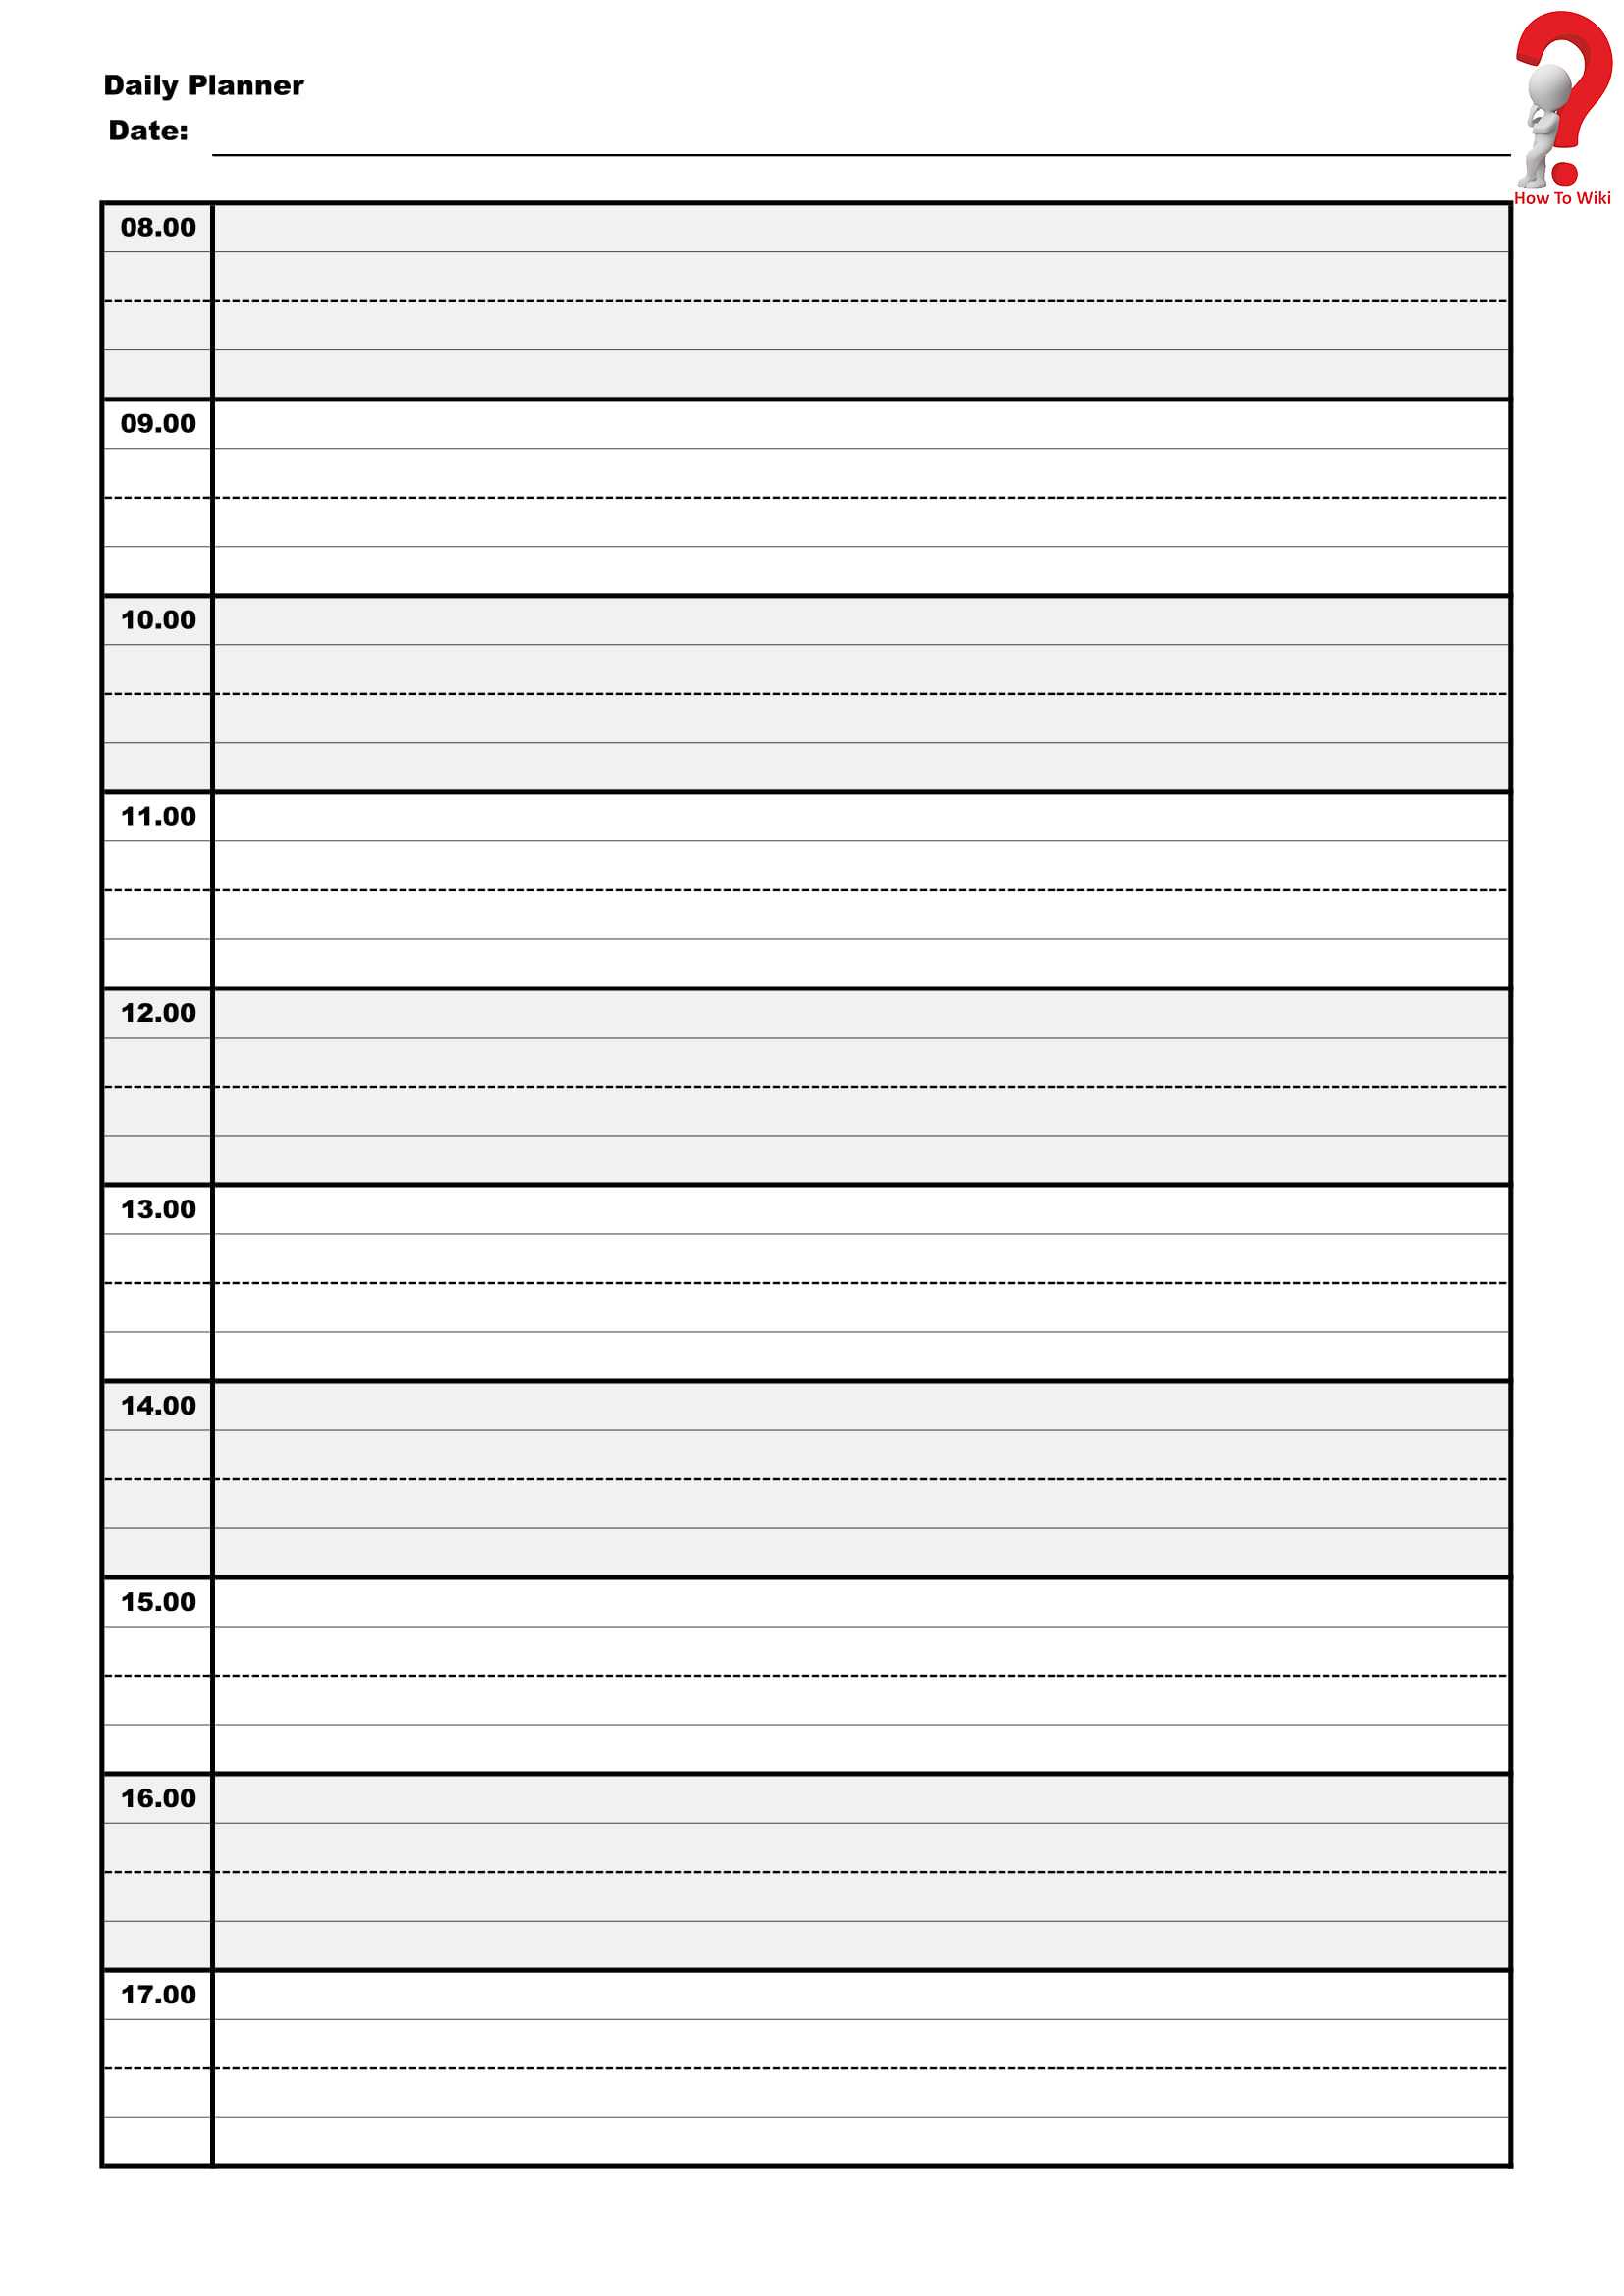 Undated Daily Planner 